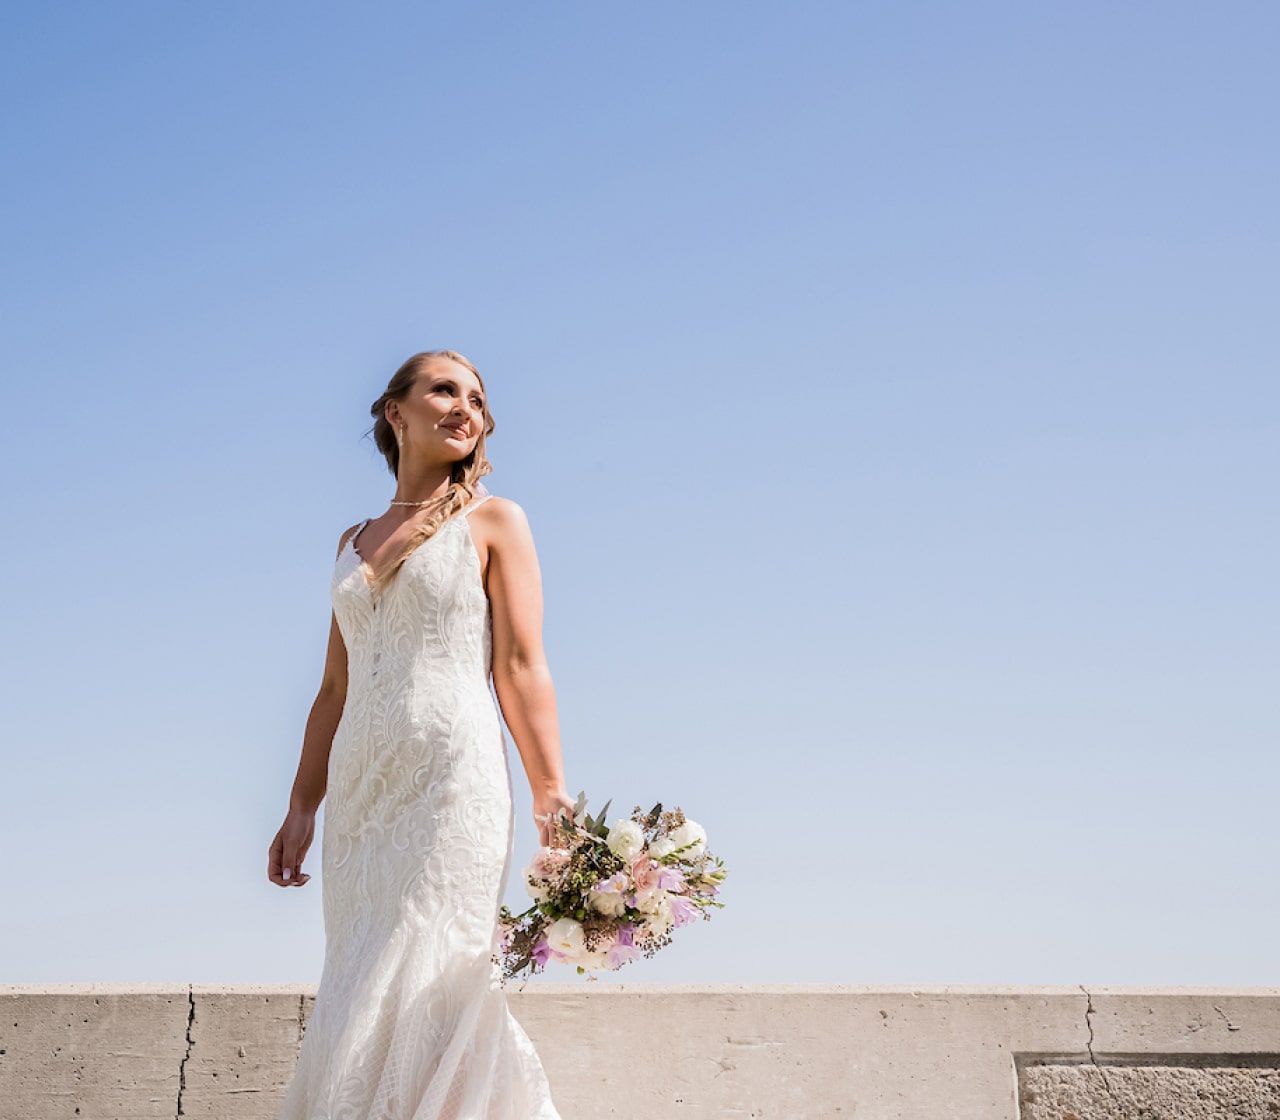 How To Sell A Wedding Dress - A Practical Wedding